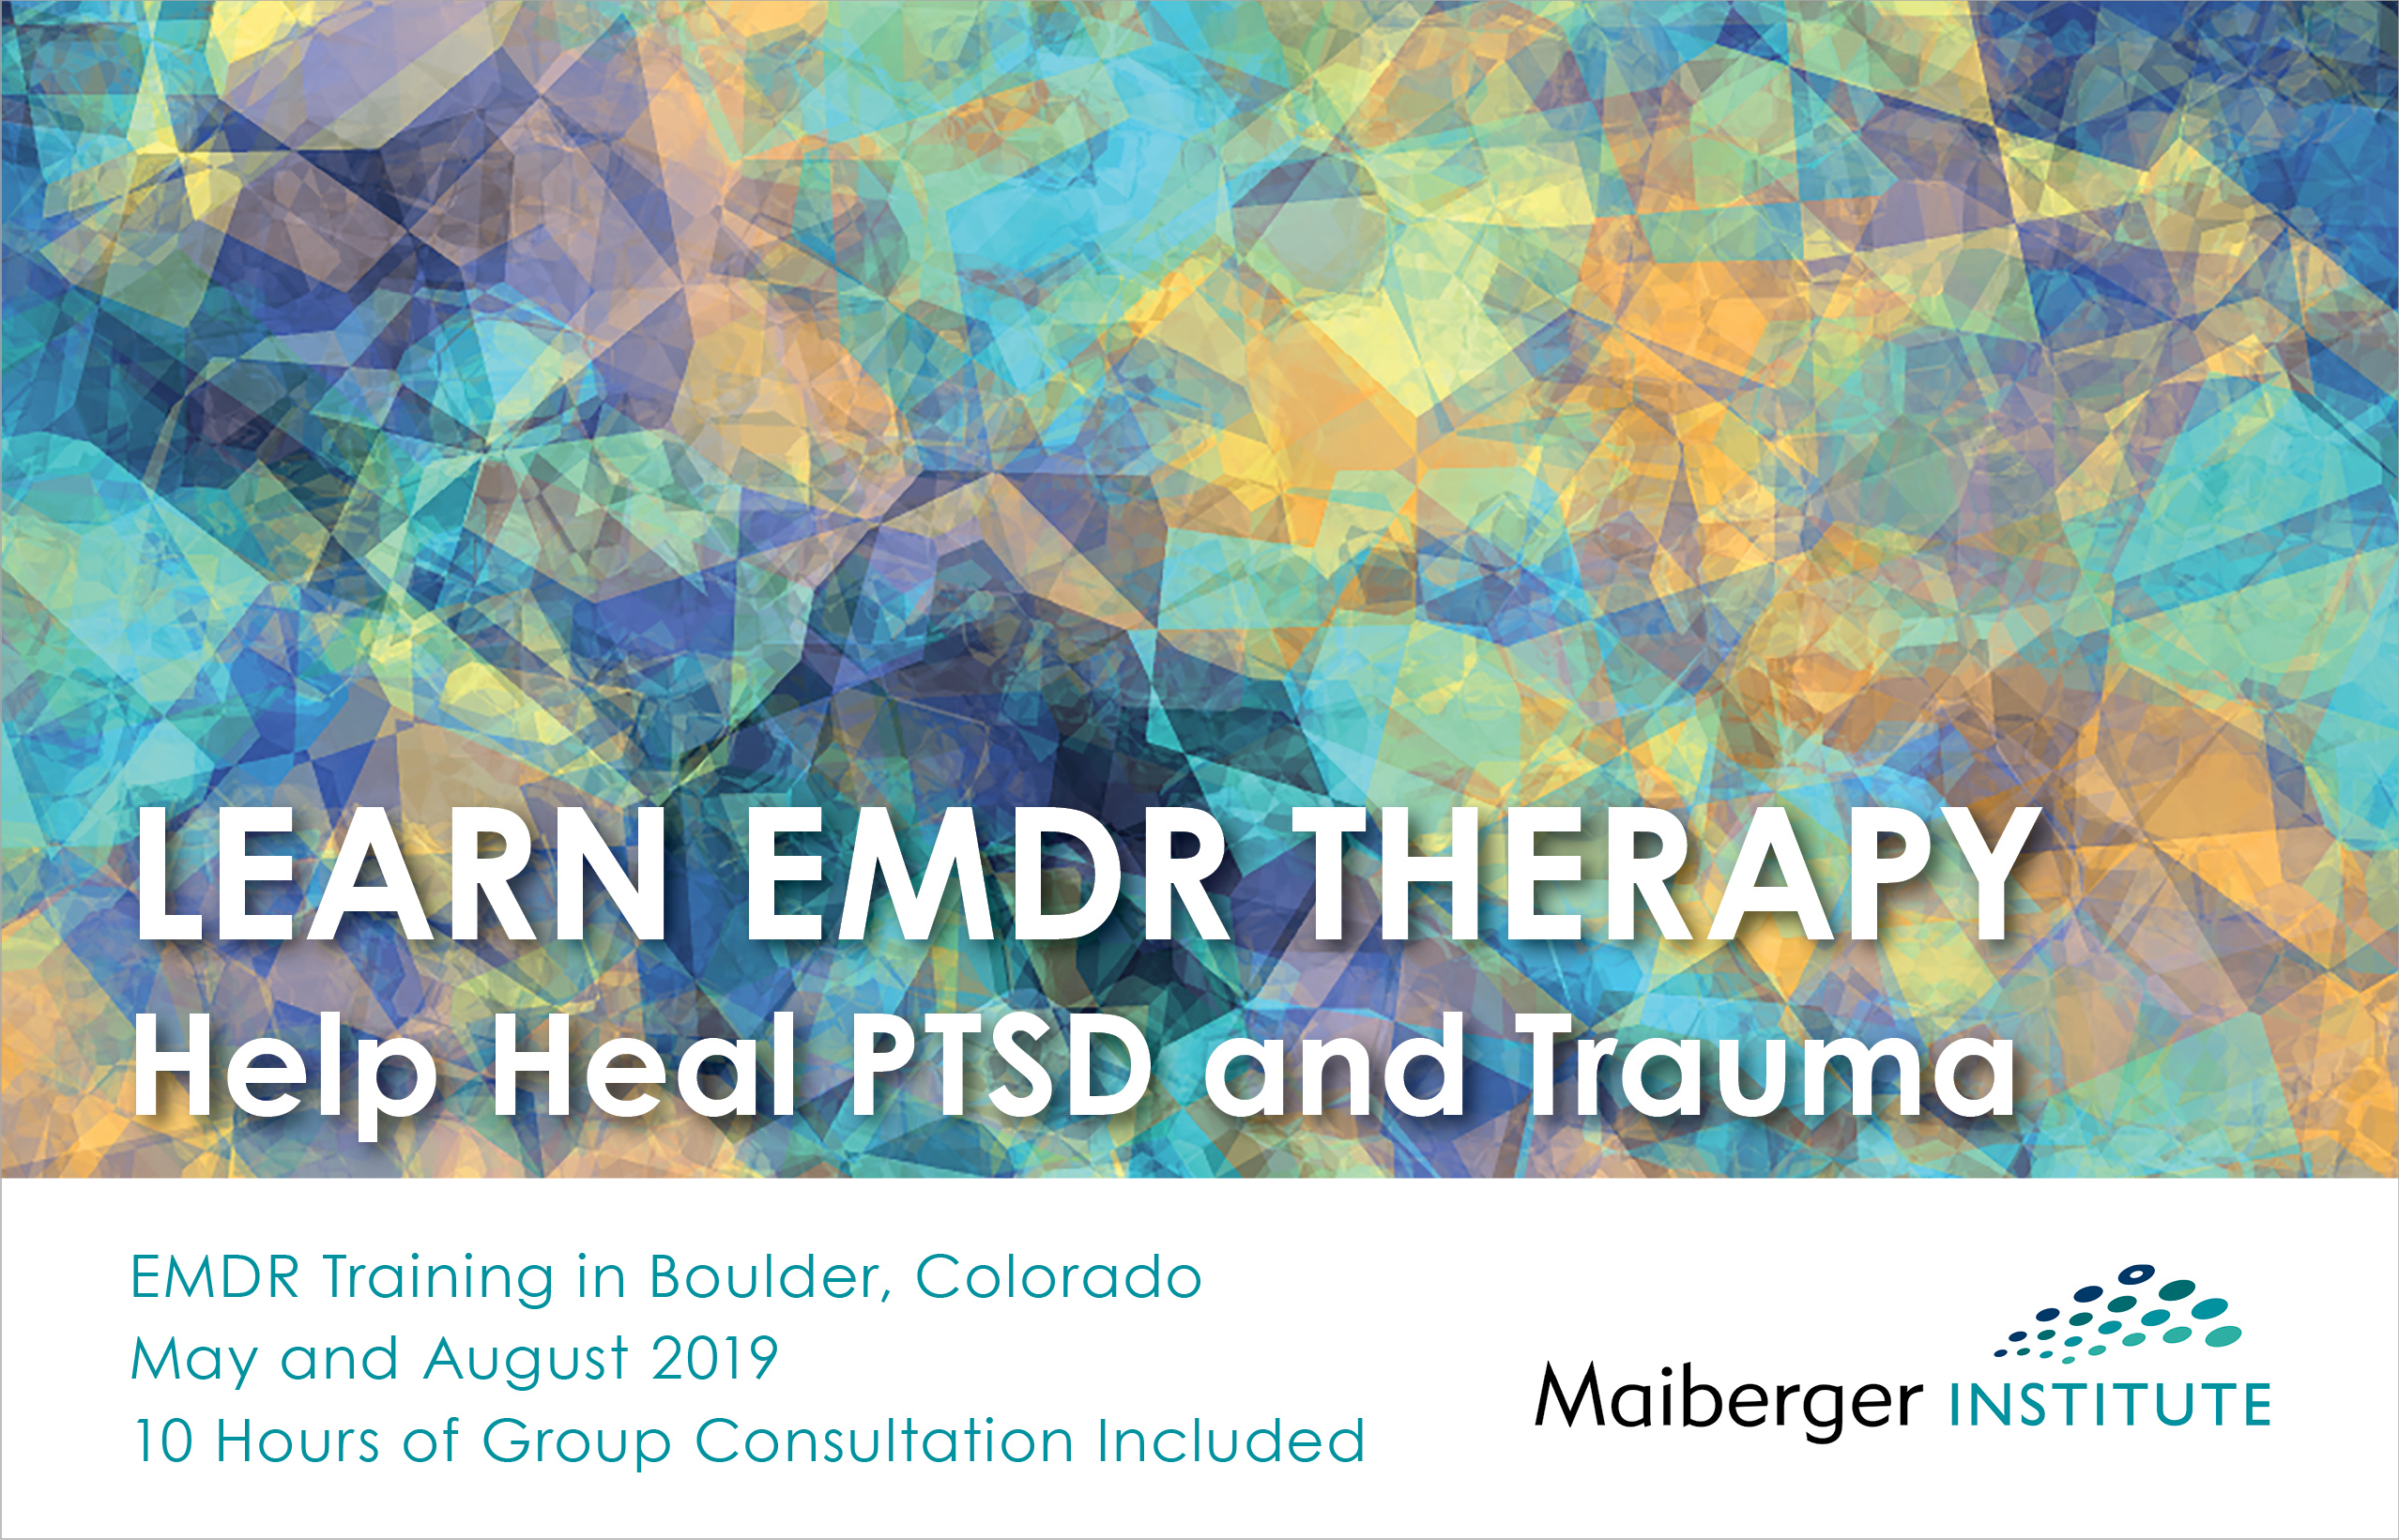 EMDR Training in Boulder, Colorado - Complete EMDR Training Package - Part 1: May 17, 2019 to May 19, 2019 - Part 2: August 2, 2019 to August 4, 2019 - 10 Hours of Group Consultation Included